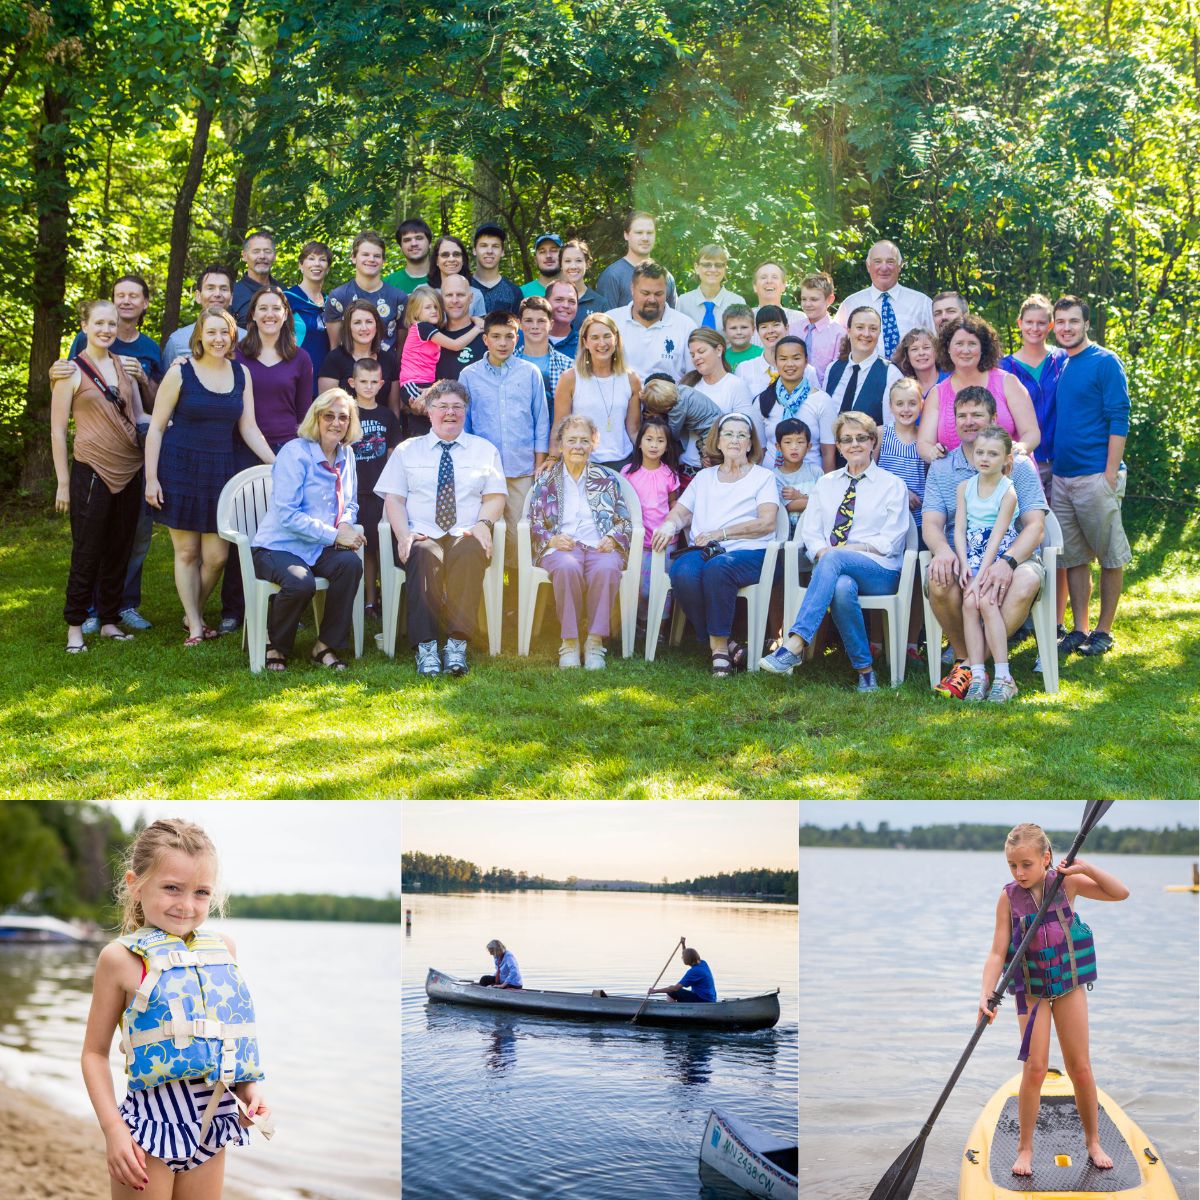 Photo collage shows a huge family reunion next to shots of kids playing in the lake.